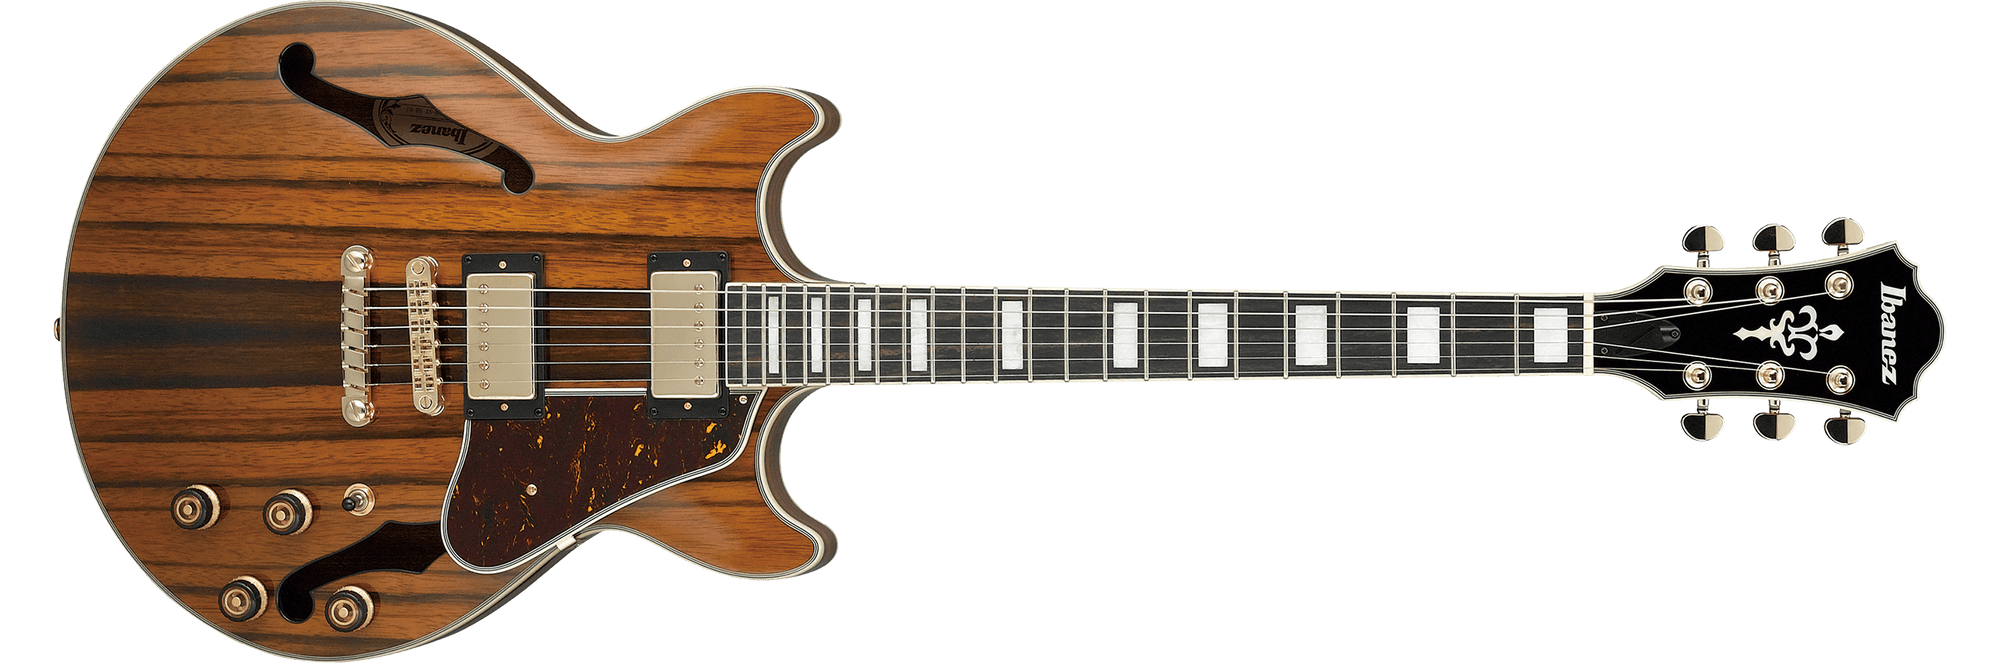 IBANEZ AM93ME-NT ARTCORE EXPRESSIONIST MACASSAR EBONY BODY, BACK & SIDES-HIGH GLOSS - The Guitar World